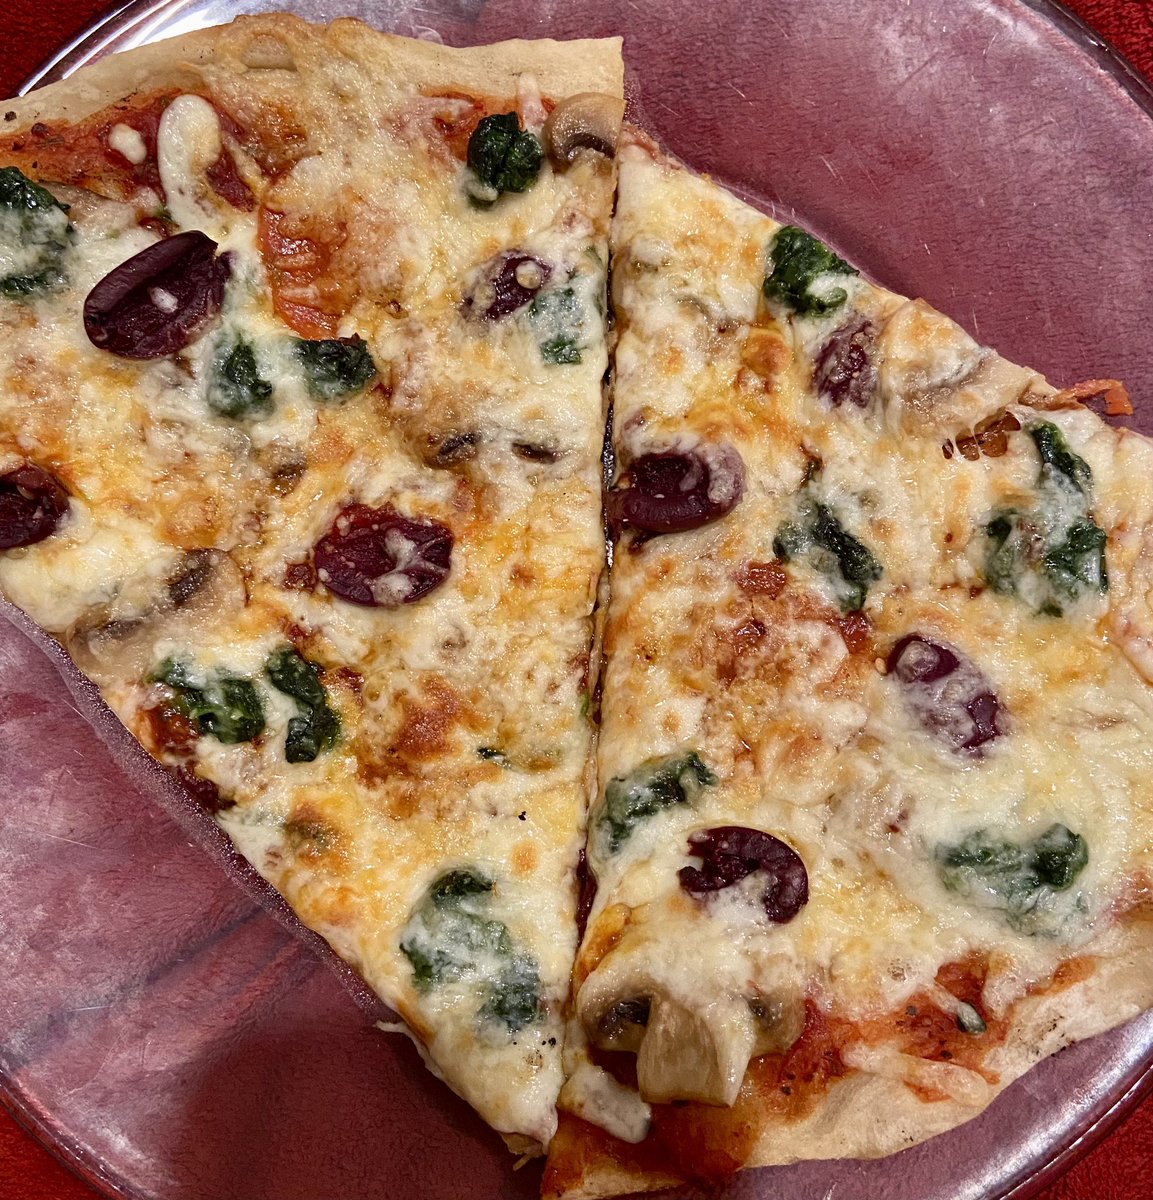 Mama Maggy’s (@MaggyMyers) pizza cooked on the grill tonight with black olives, spinach, pepperoni and mushrooms. Served with a red wine (OK, not sure what kind of red wine she gave me, but it was an excellent match).